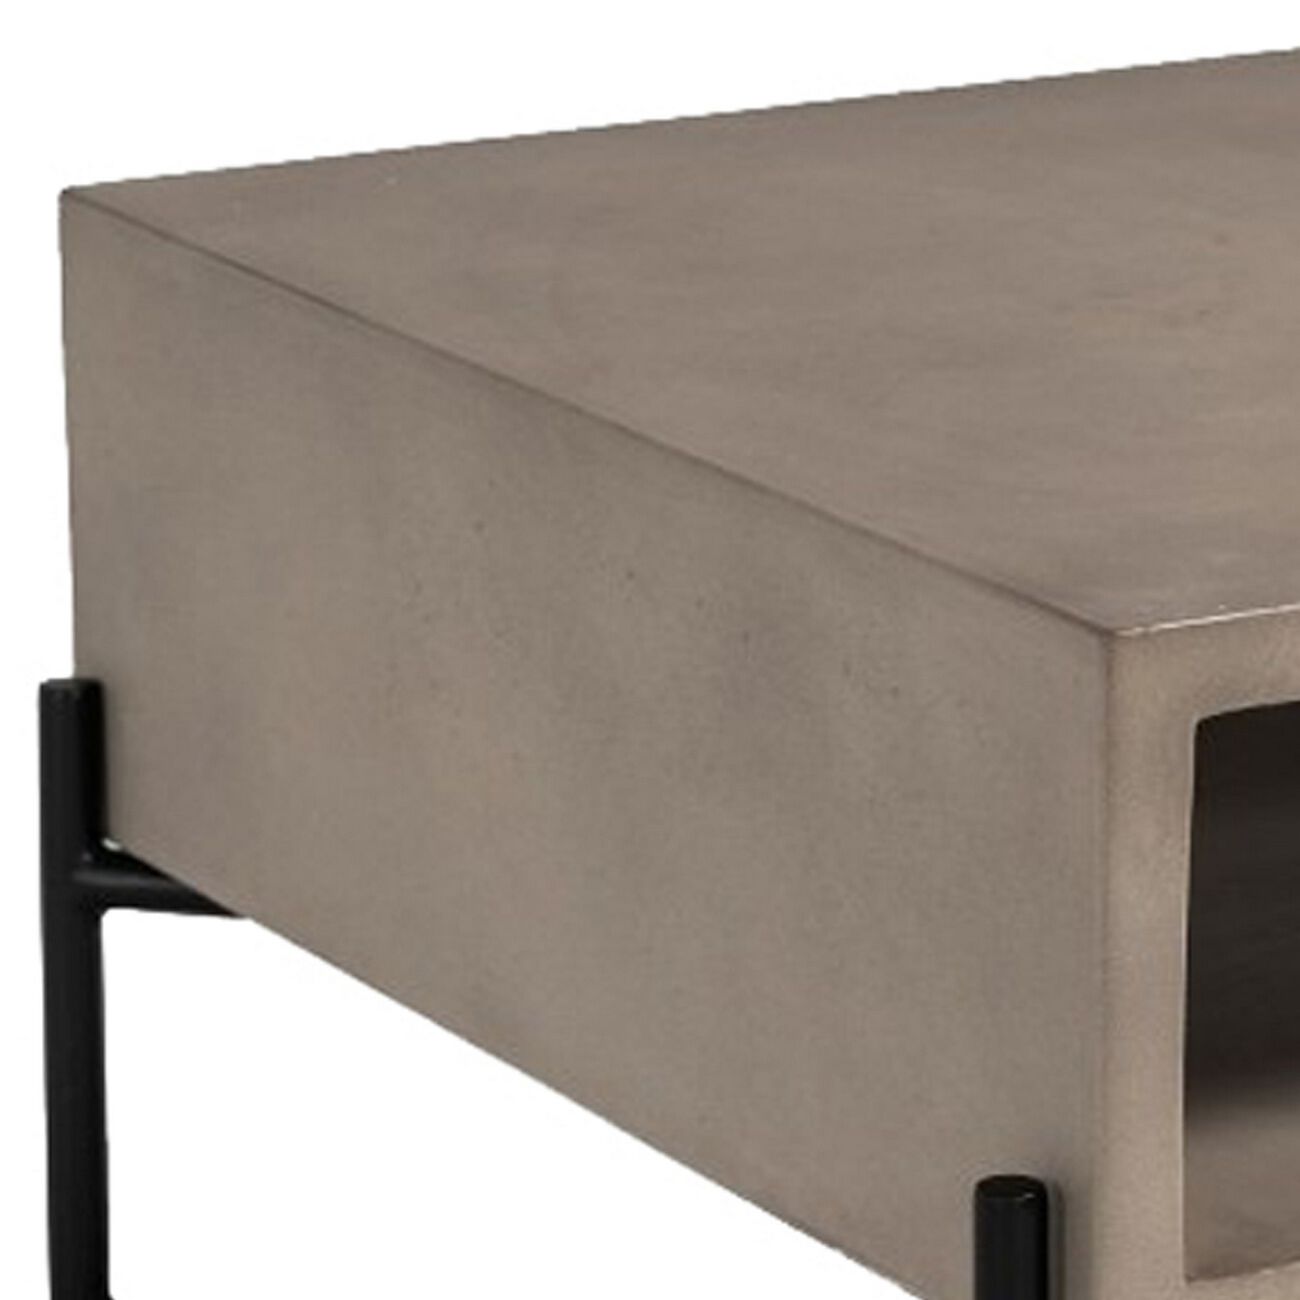 Concrete Coffee Table with Metal Frame and Open Compartment, Gray and Black